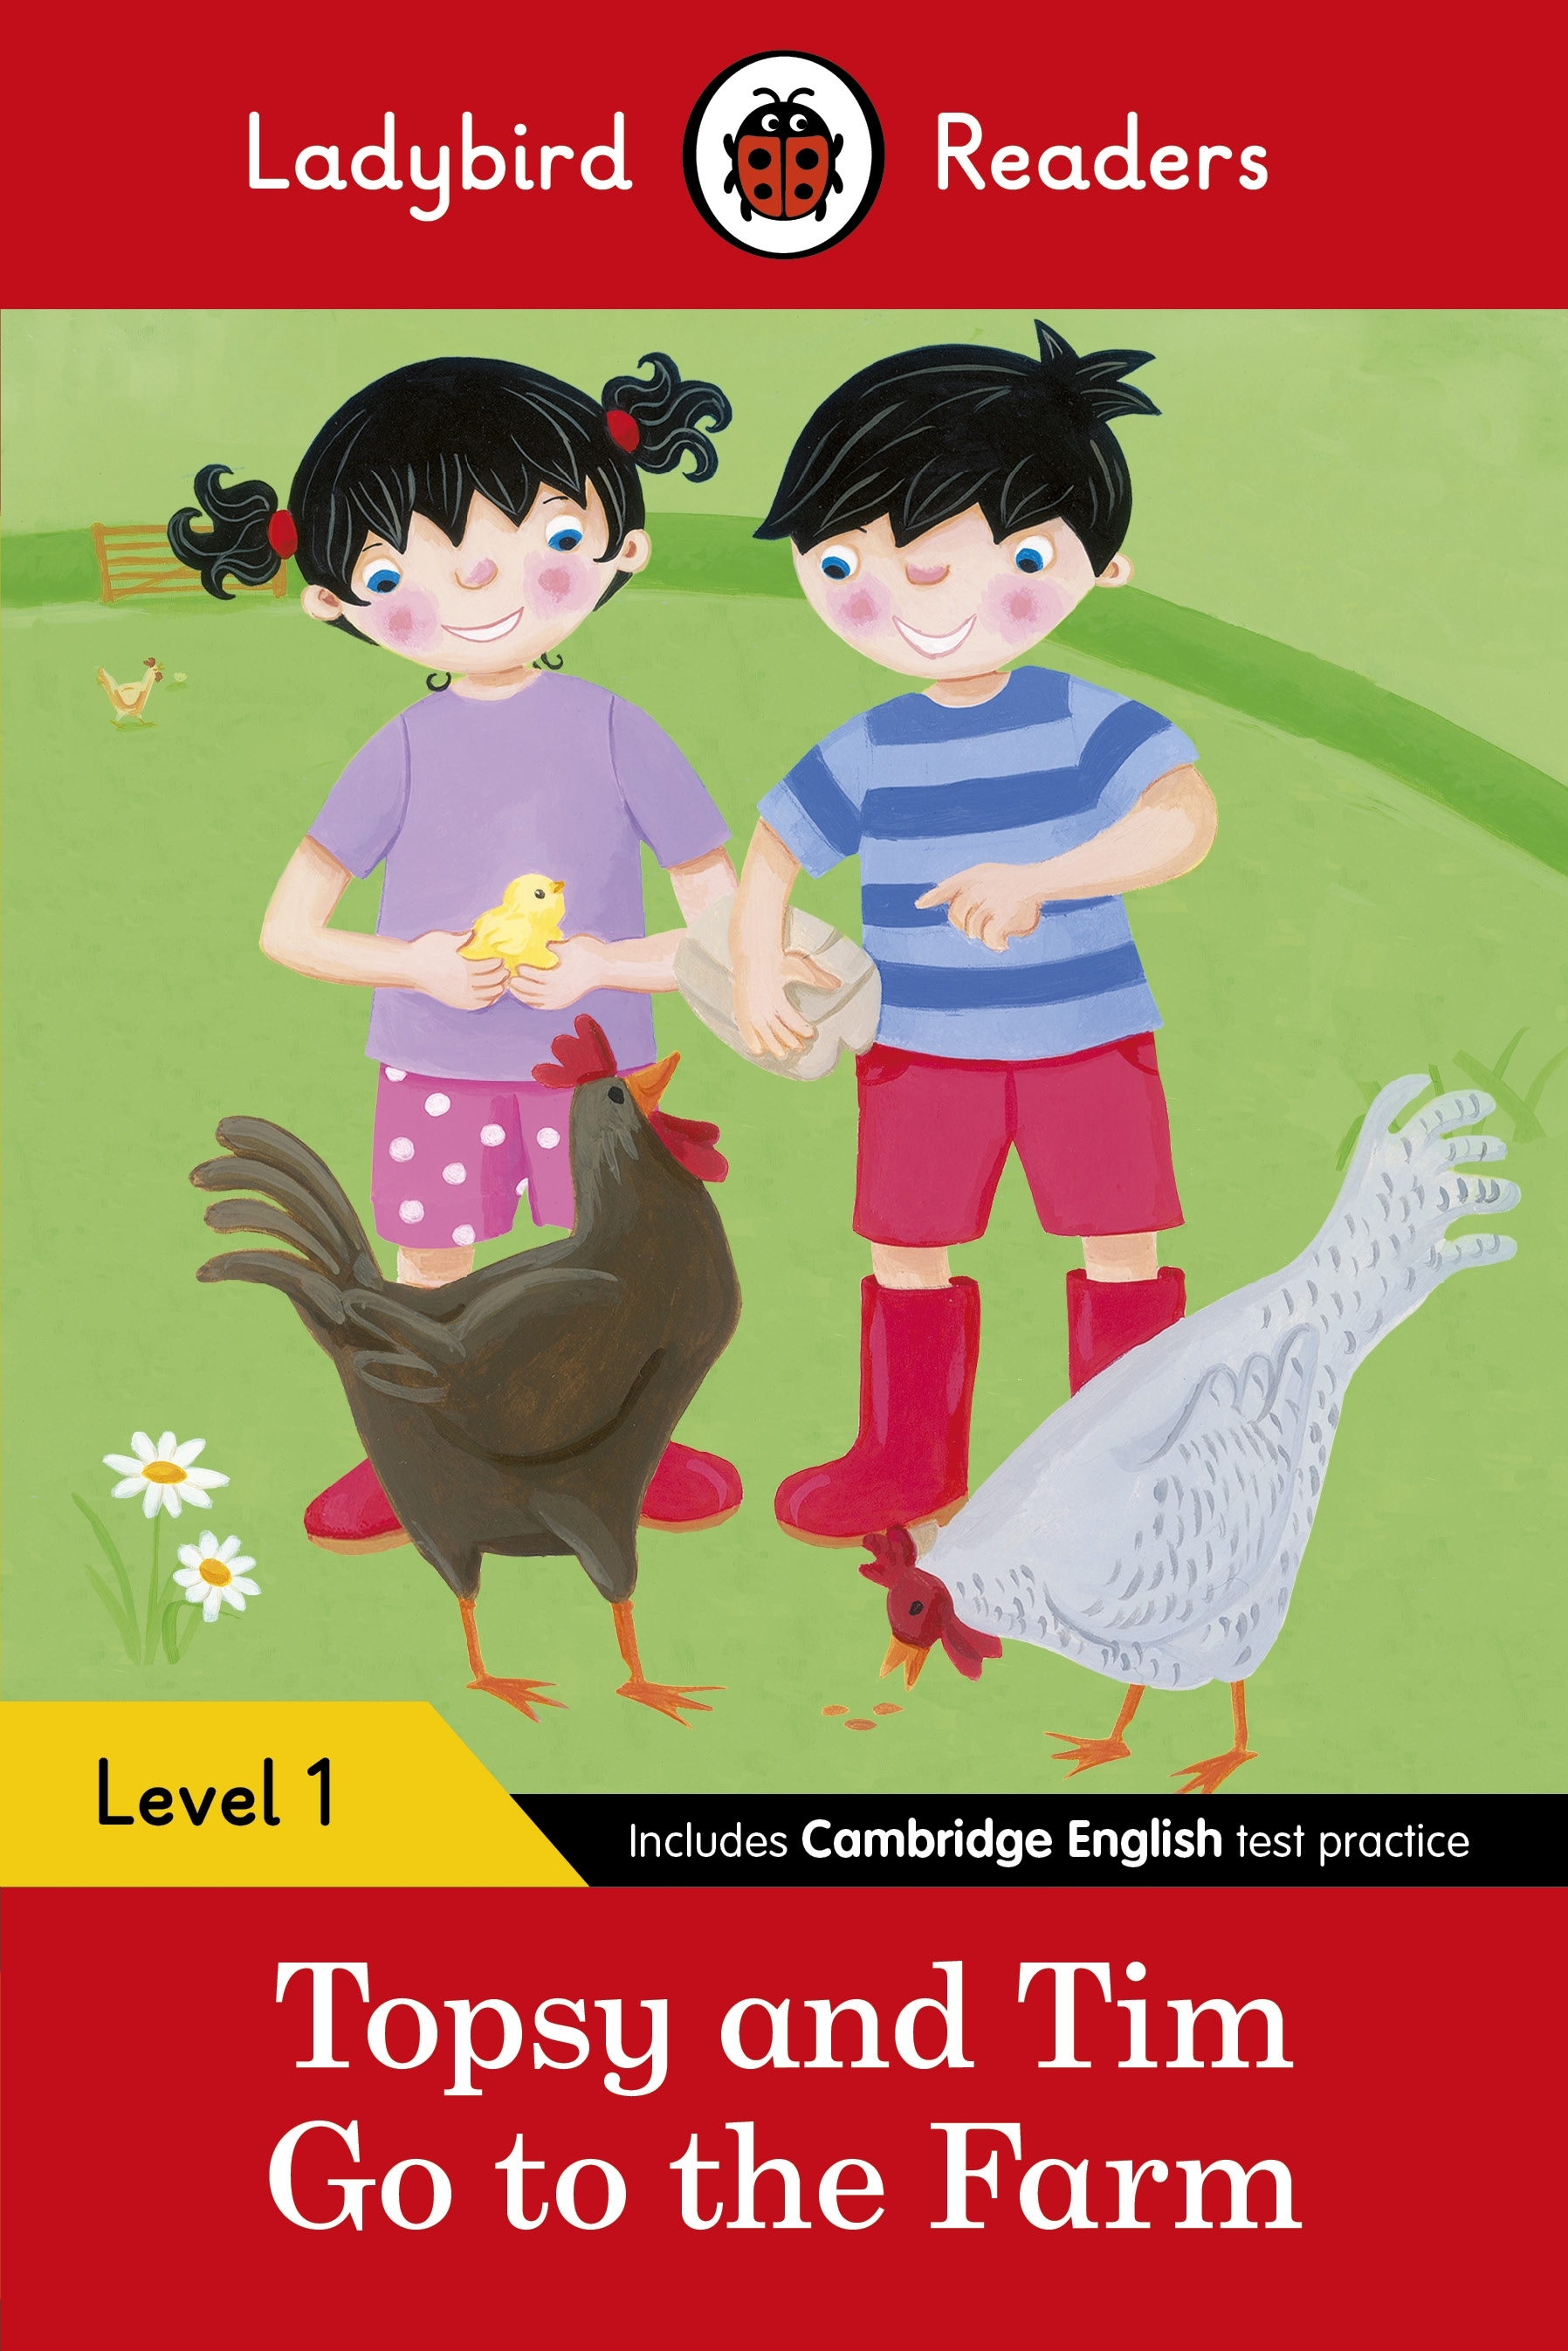 Ladybird Readers Level 1 - Topsy and Tim - Go to the Farm (ELT Graded